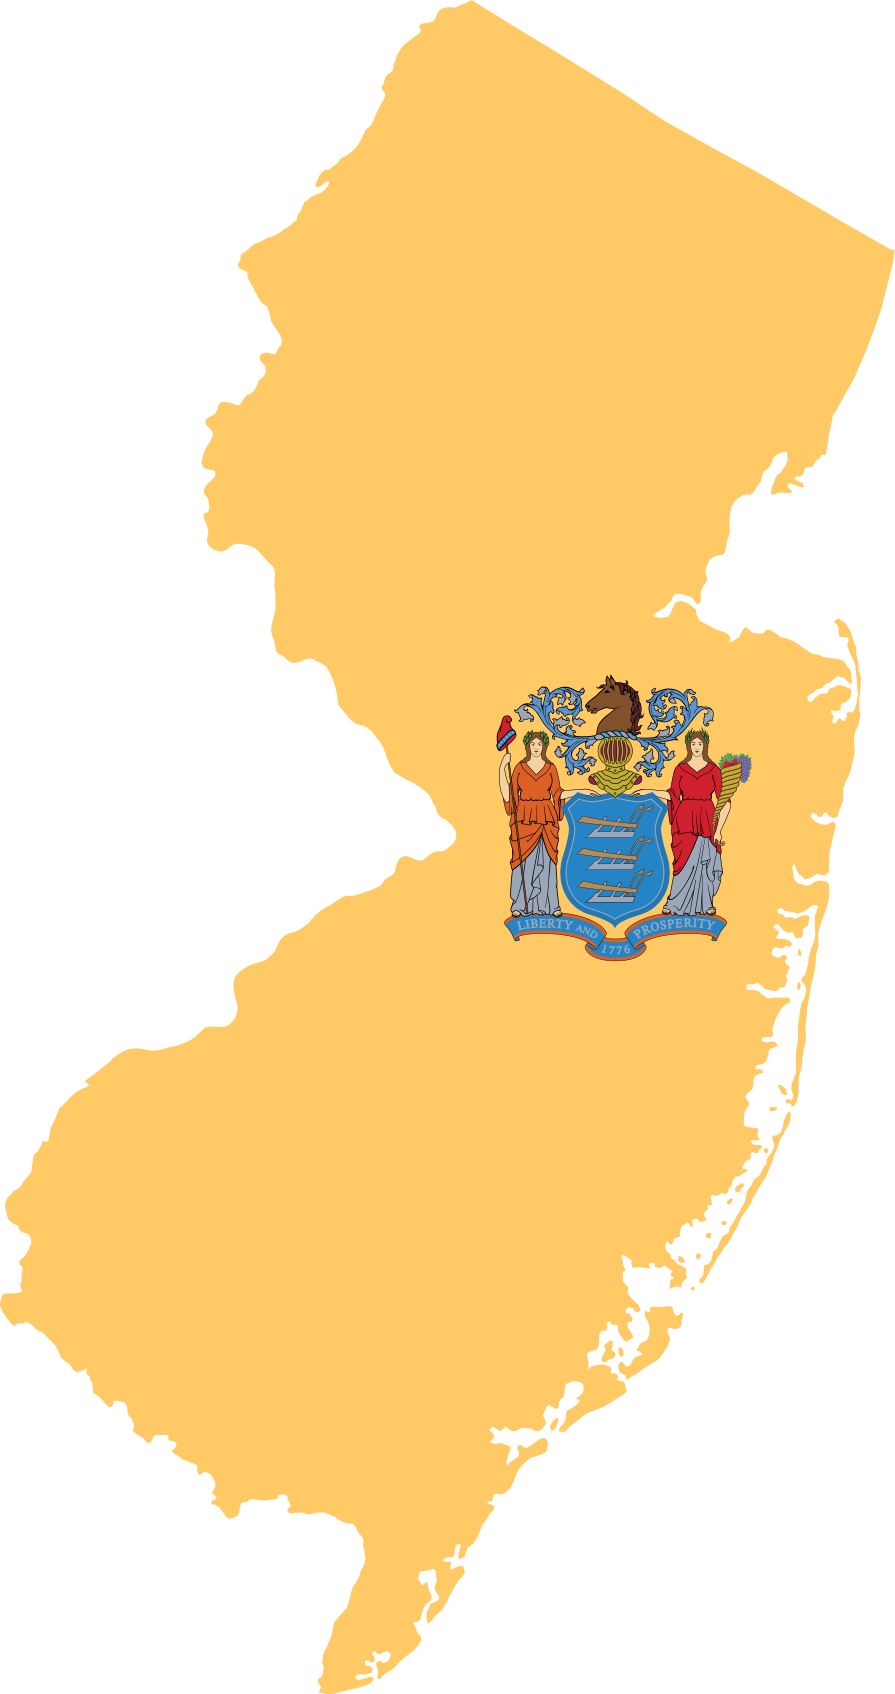 Download File:Flag-map of New Jersey.svg - Wikipedia